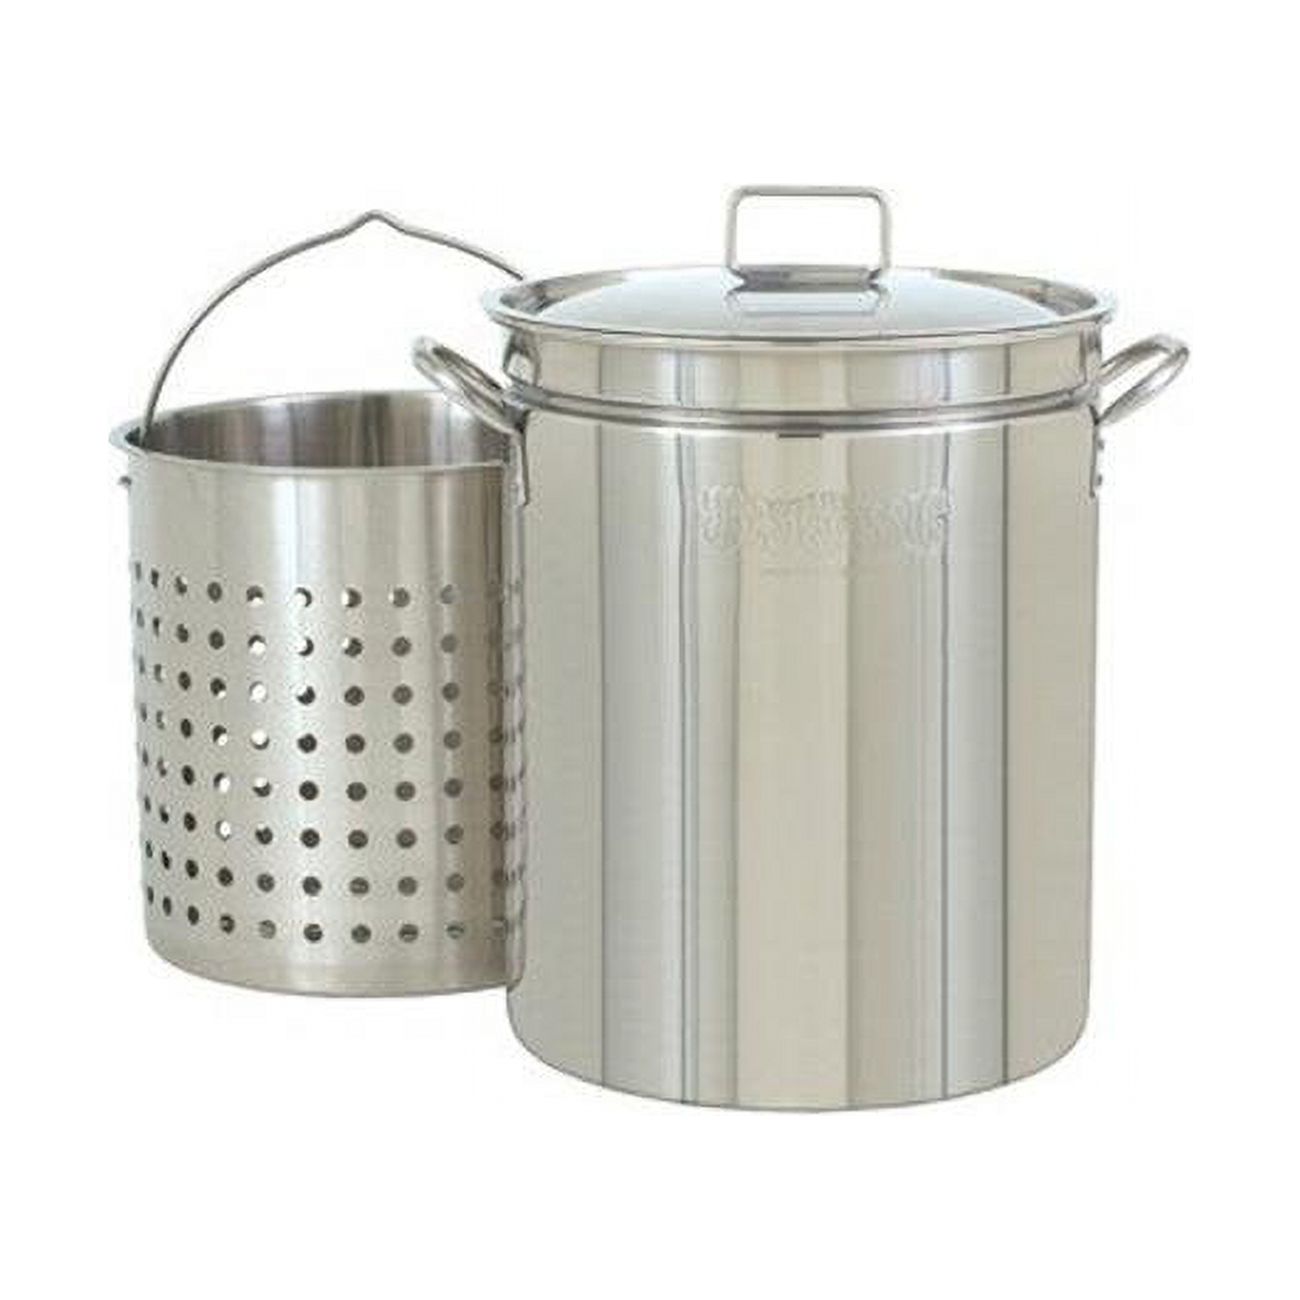 Bayou Classic KDS-144 44 qt Stainless Boil Steam Fry Pot Stock - image 1 of 3